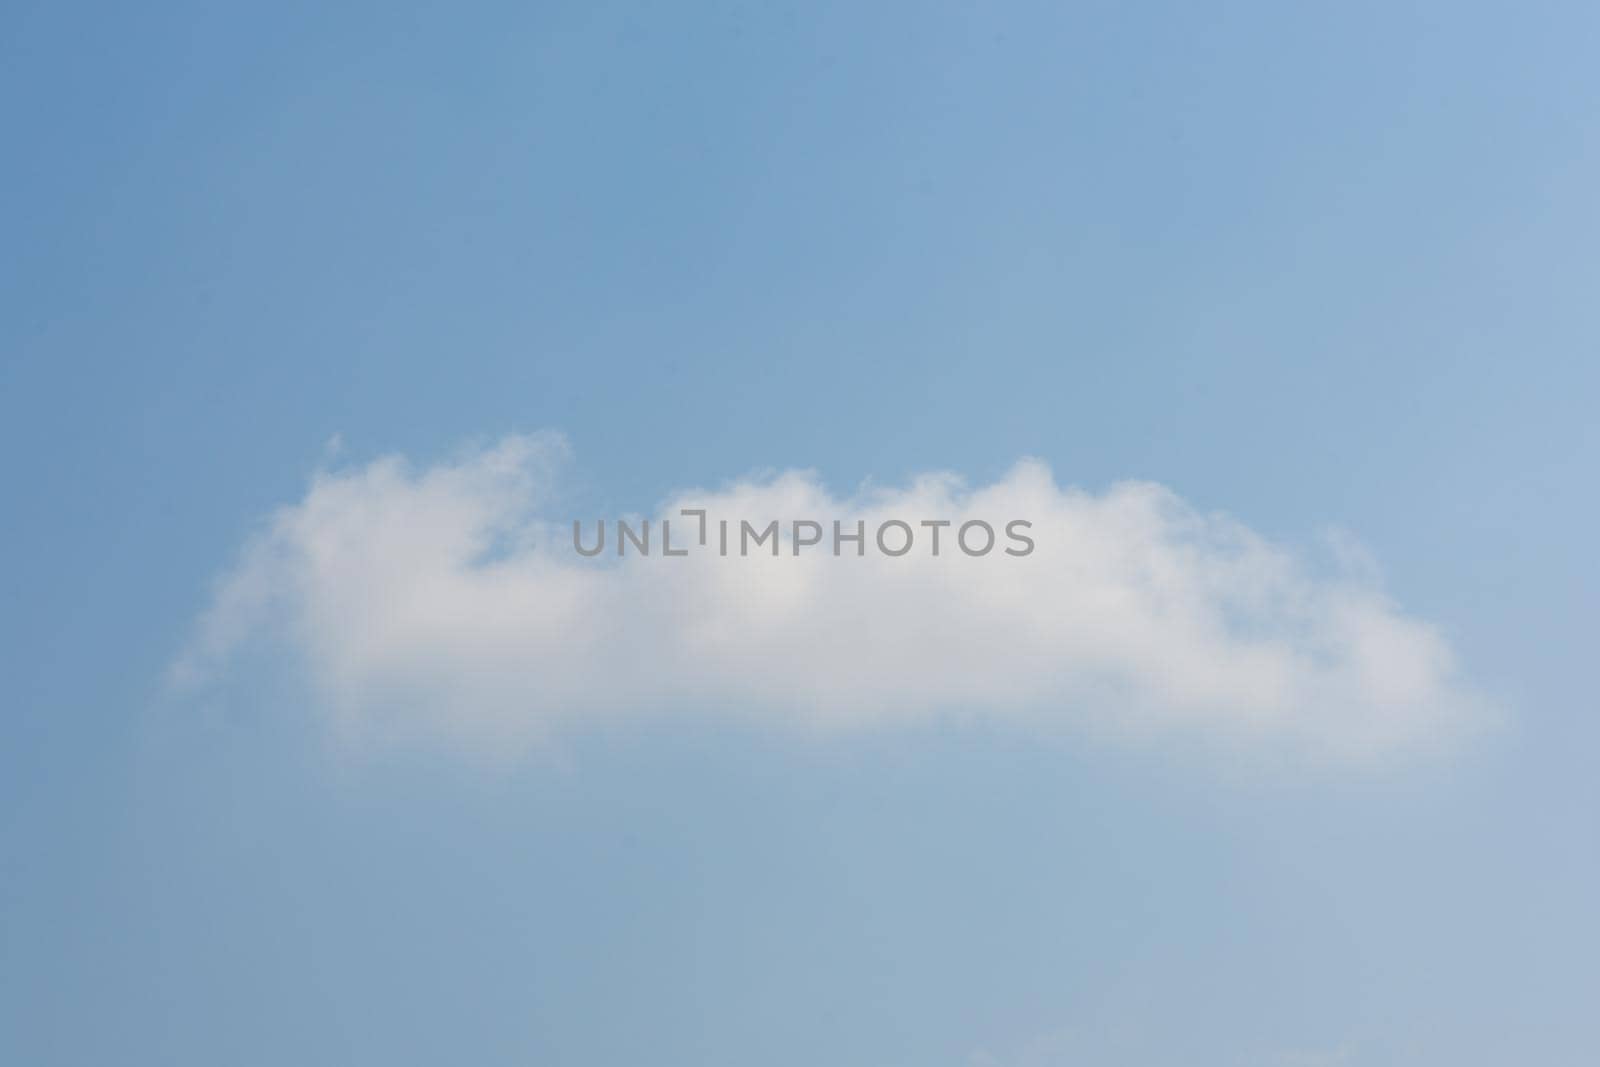 Background of sky and clouds